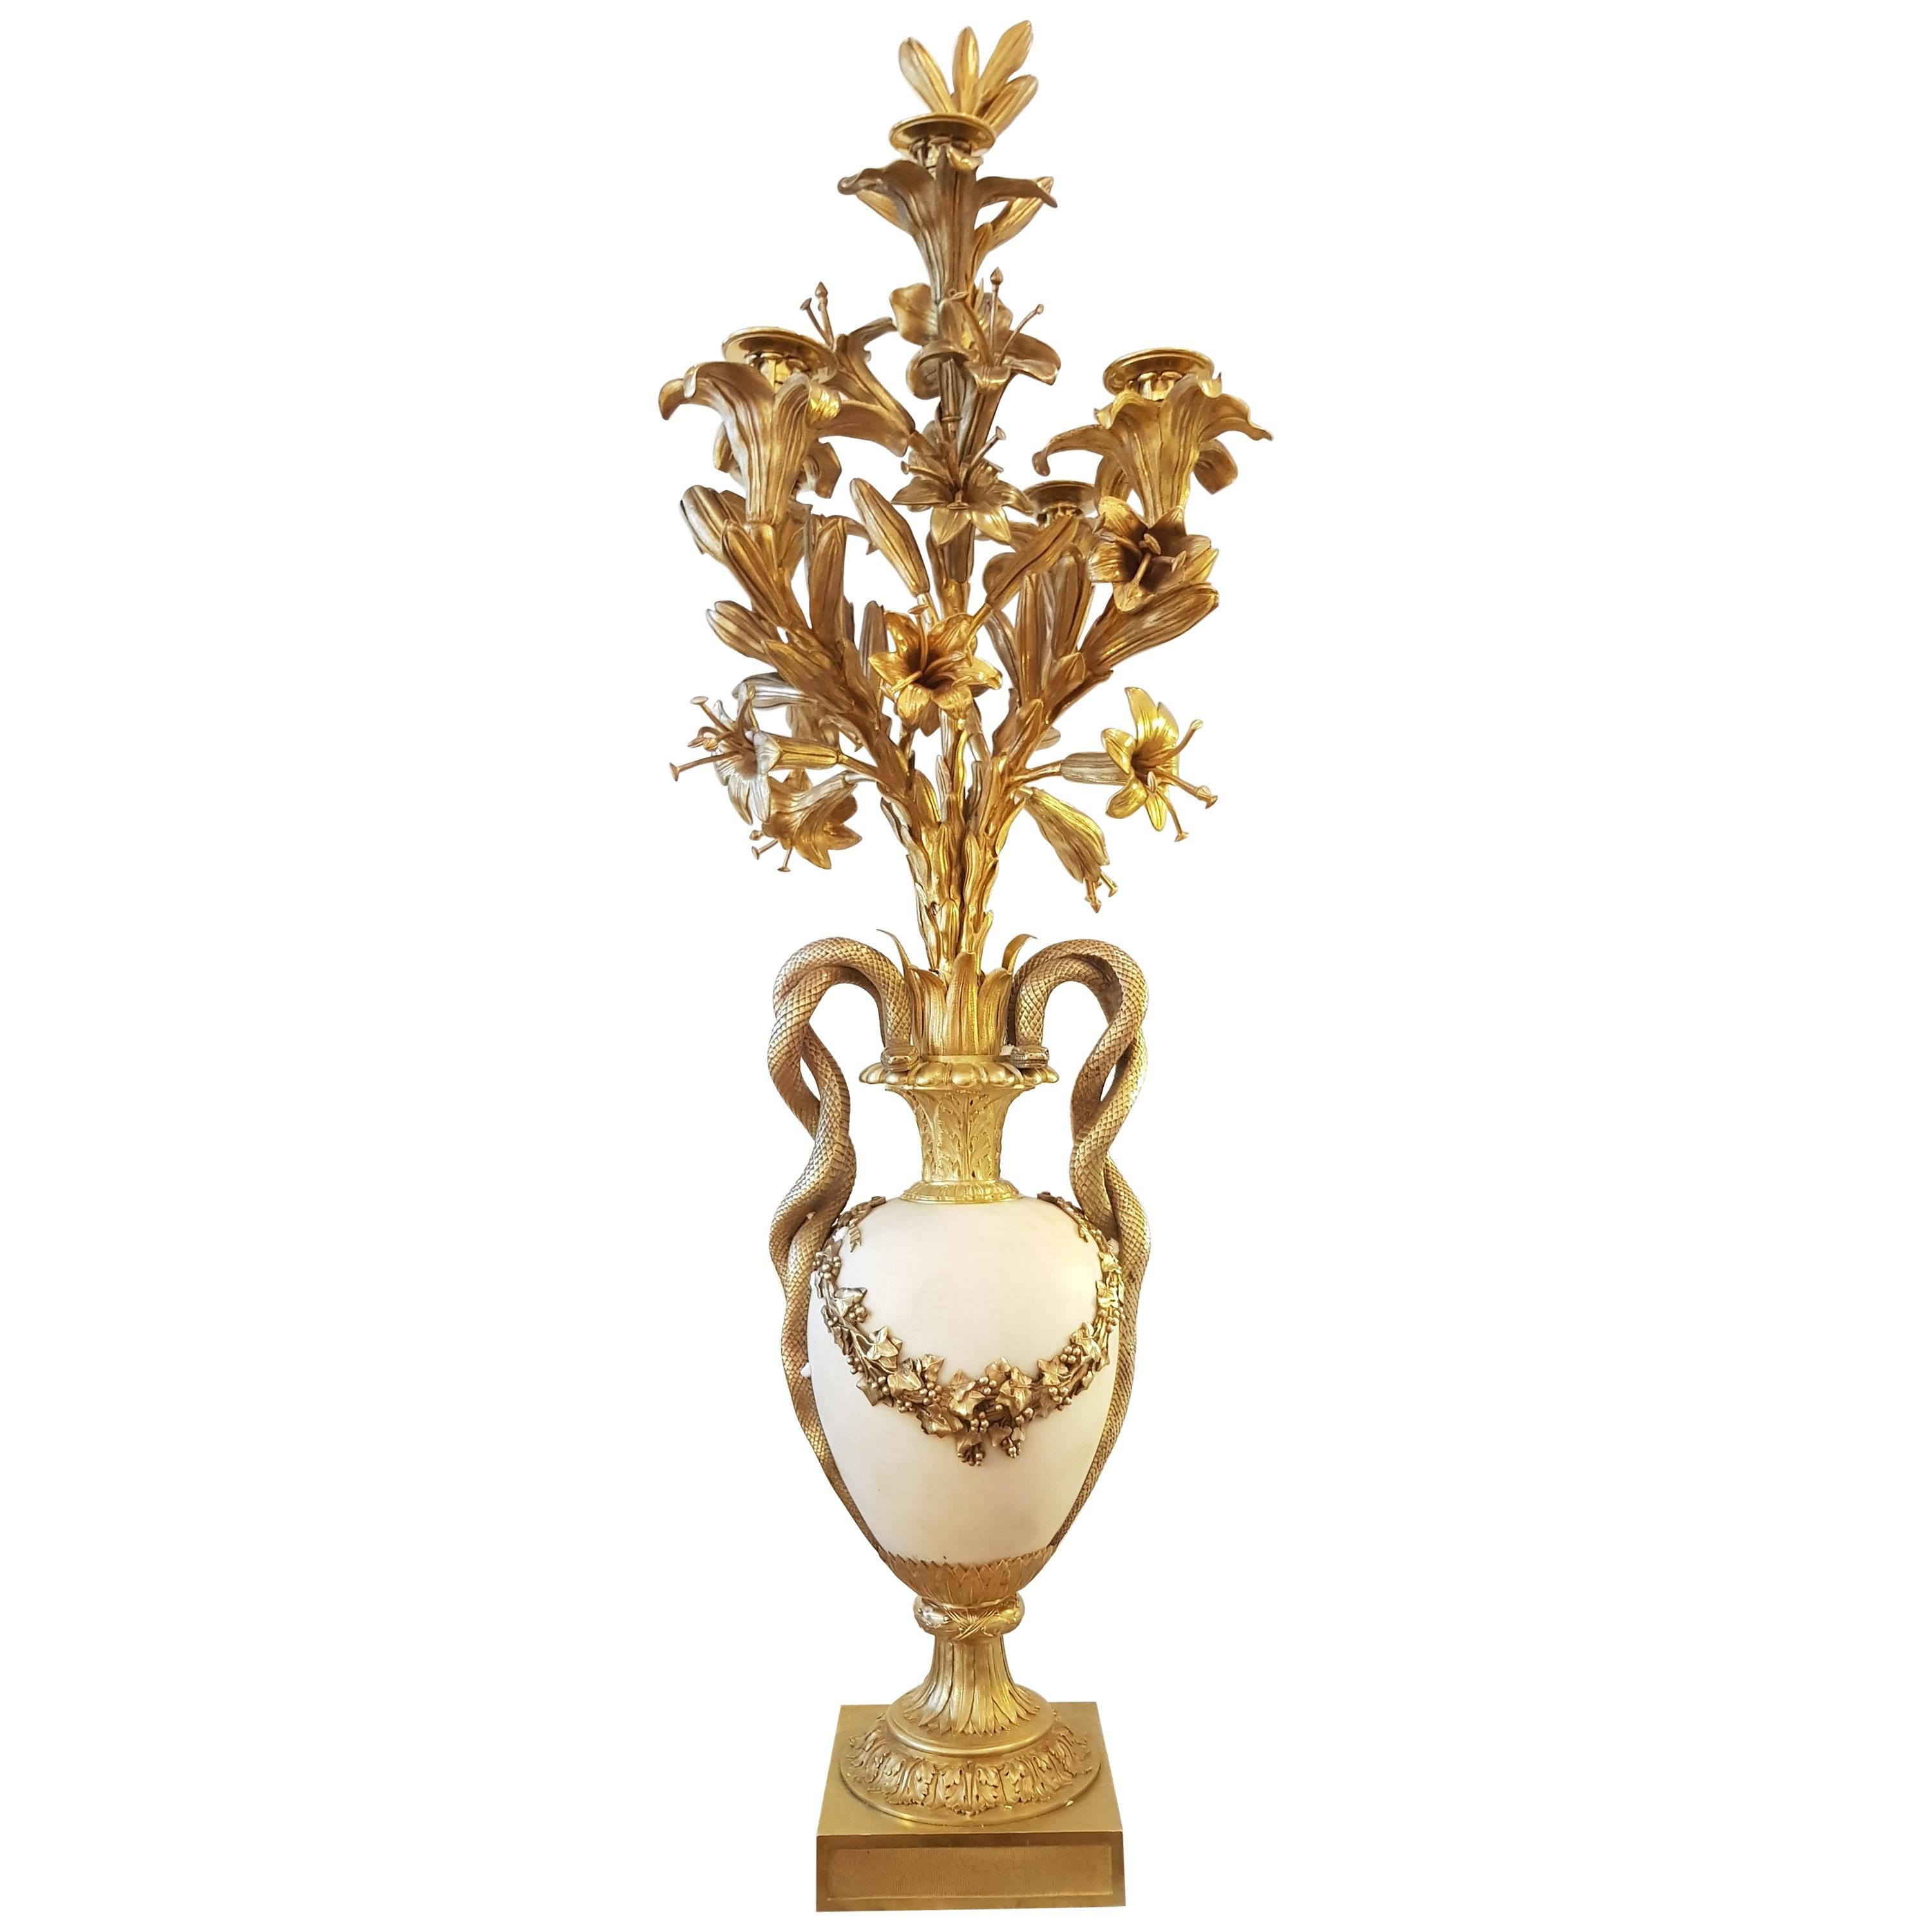 Pair of Giltbronze of Louis XVI Candelabra For Sale